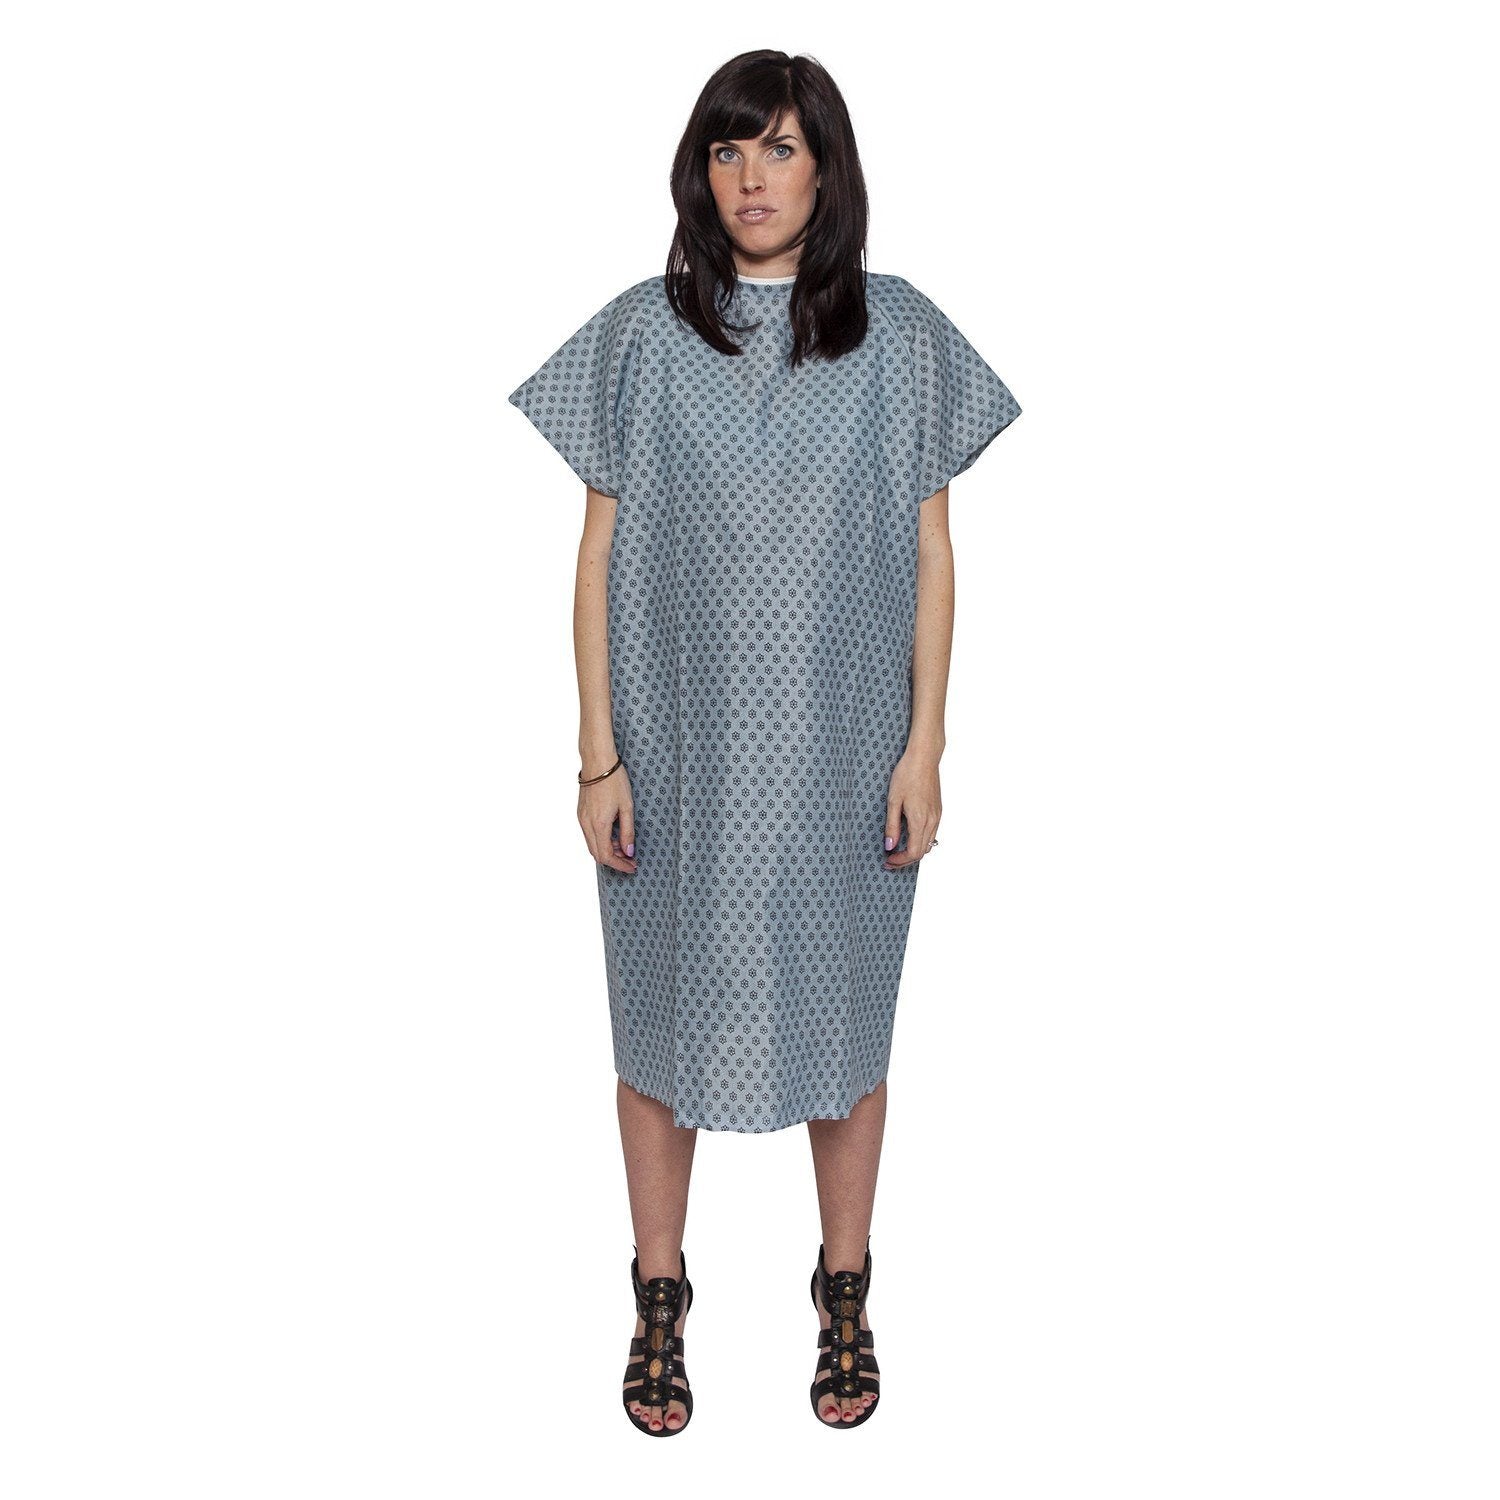 Ugly Hospital Gown df8b4dc6 1c18 4984 a29d